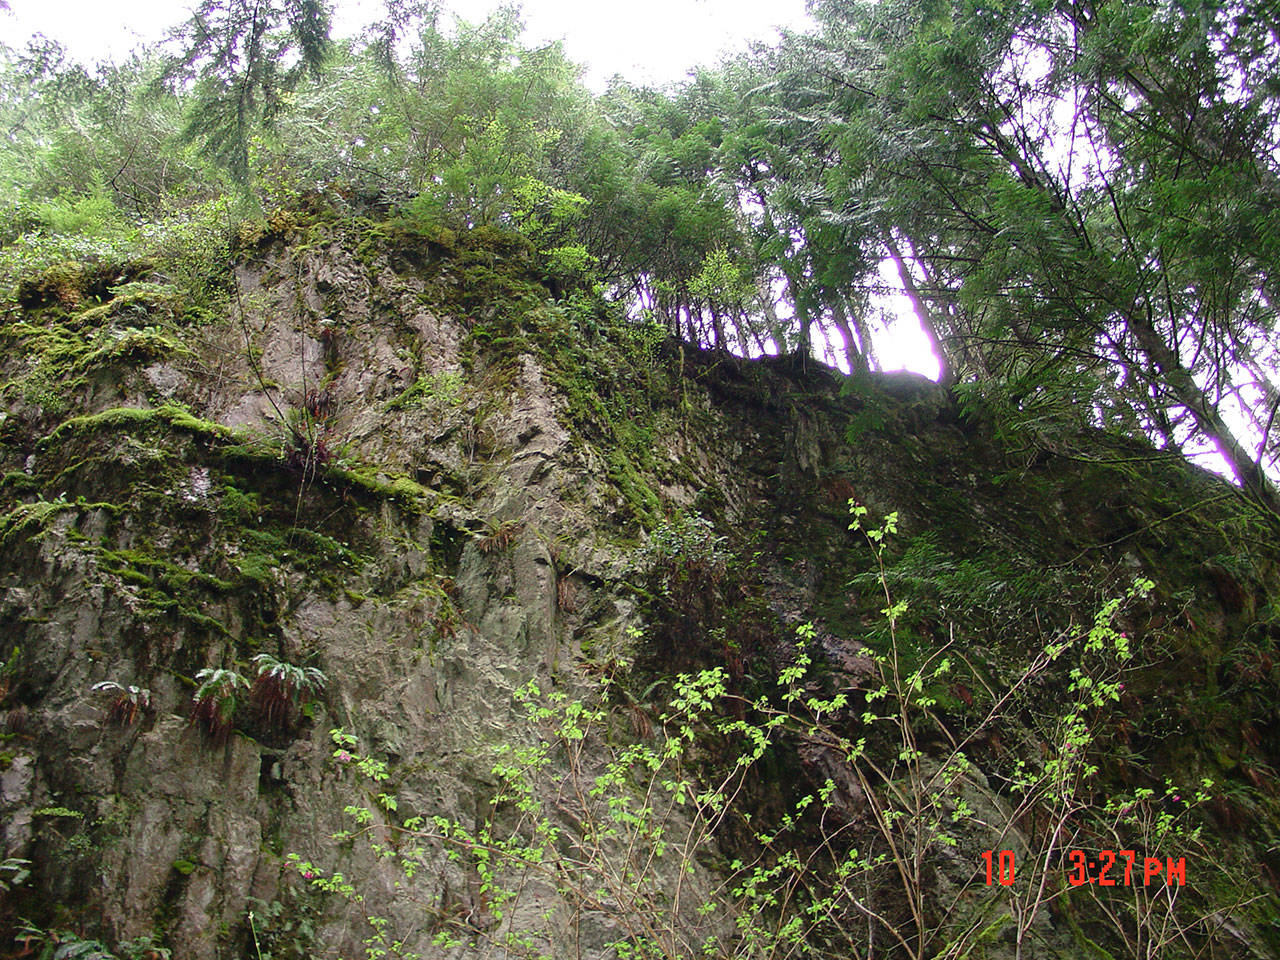 A sheer cliff face stood near the spot where two surveyors found a man’s bones off Sultan Basin Road in April 2007. (Courtesy of the Snohomish County Medical Examiner’s Office.)